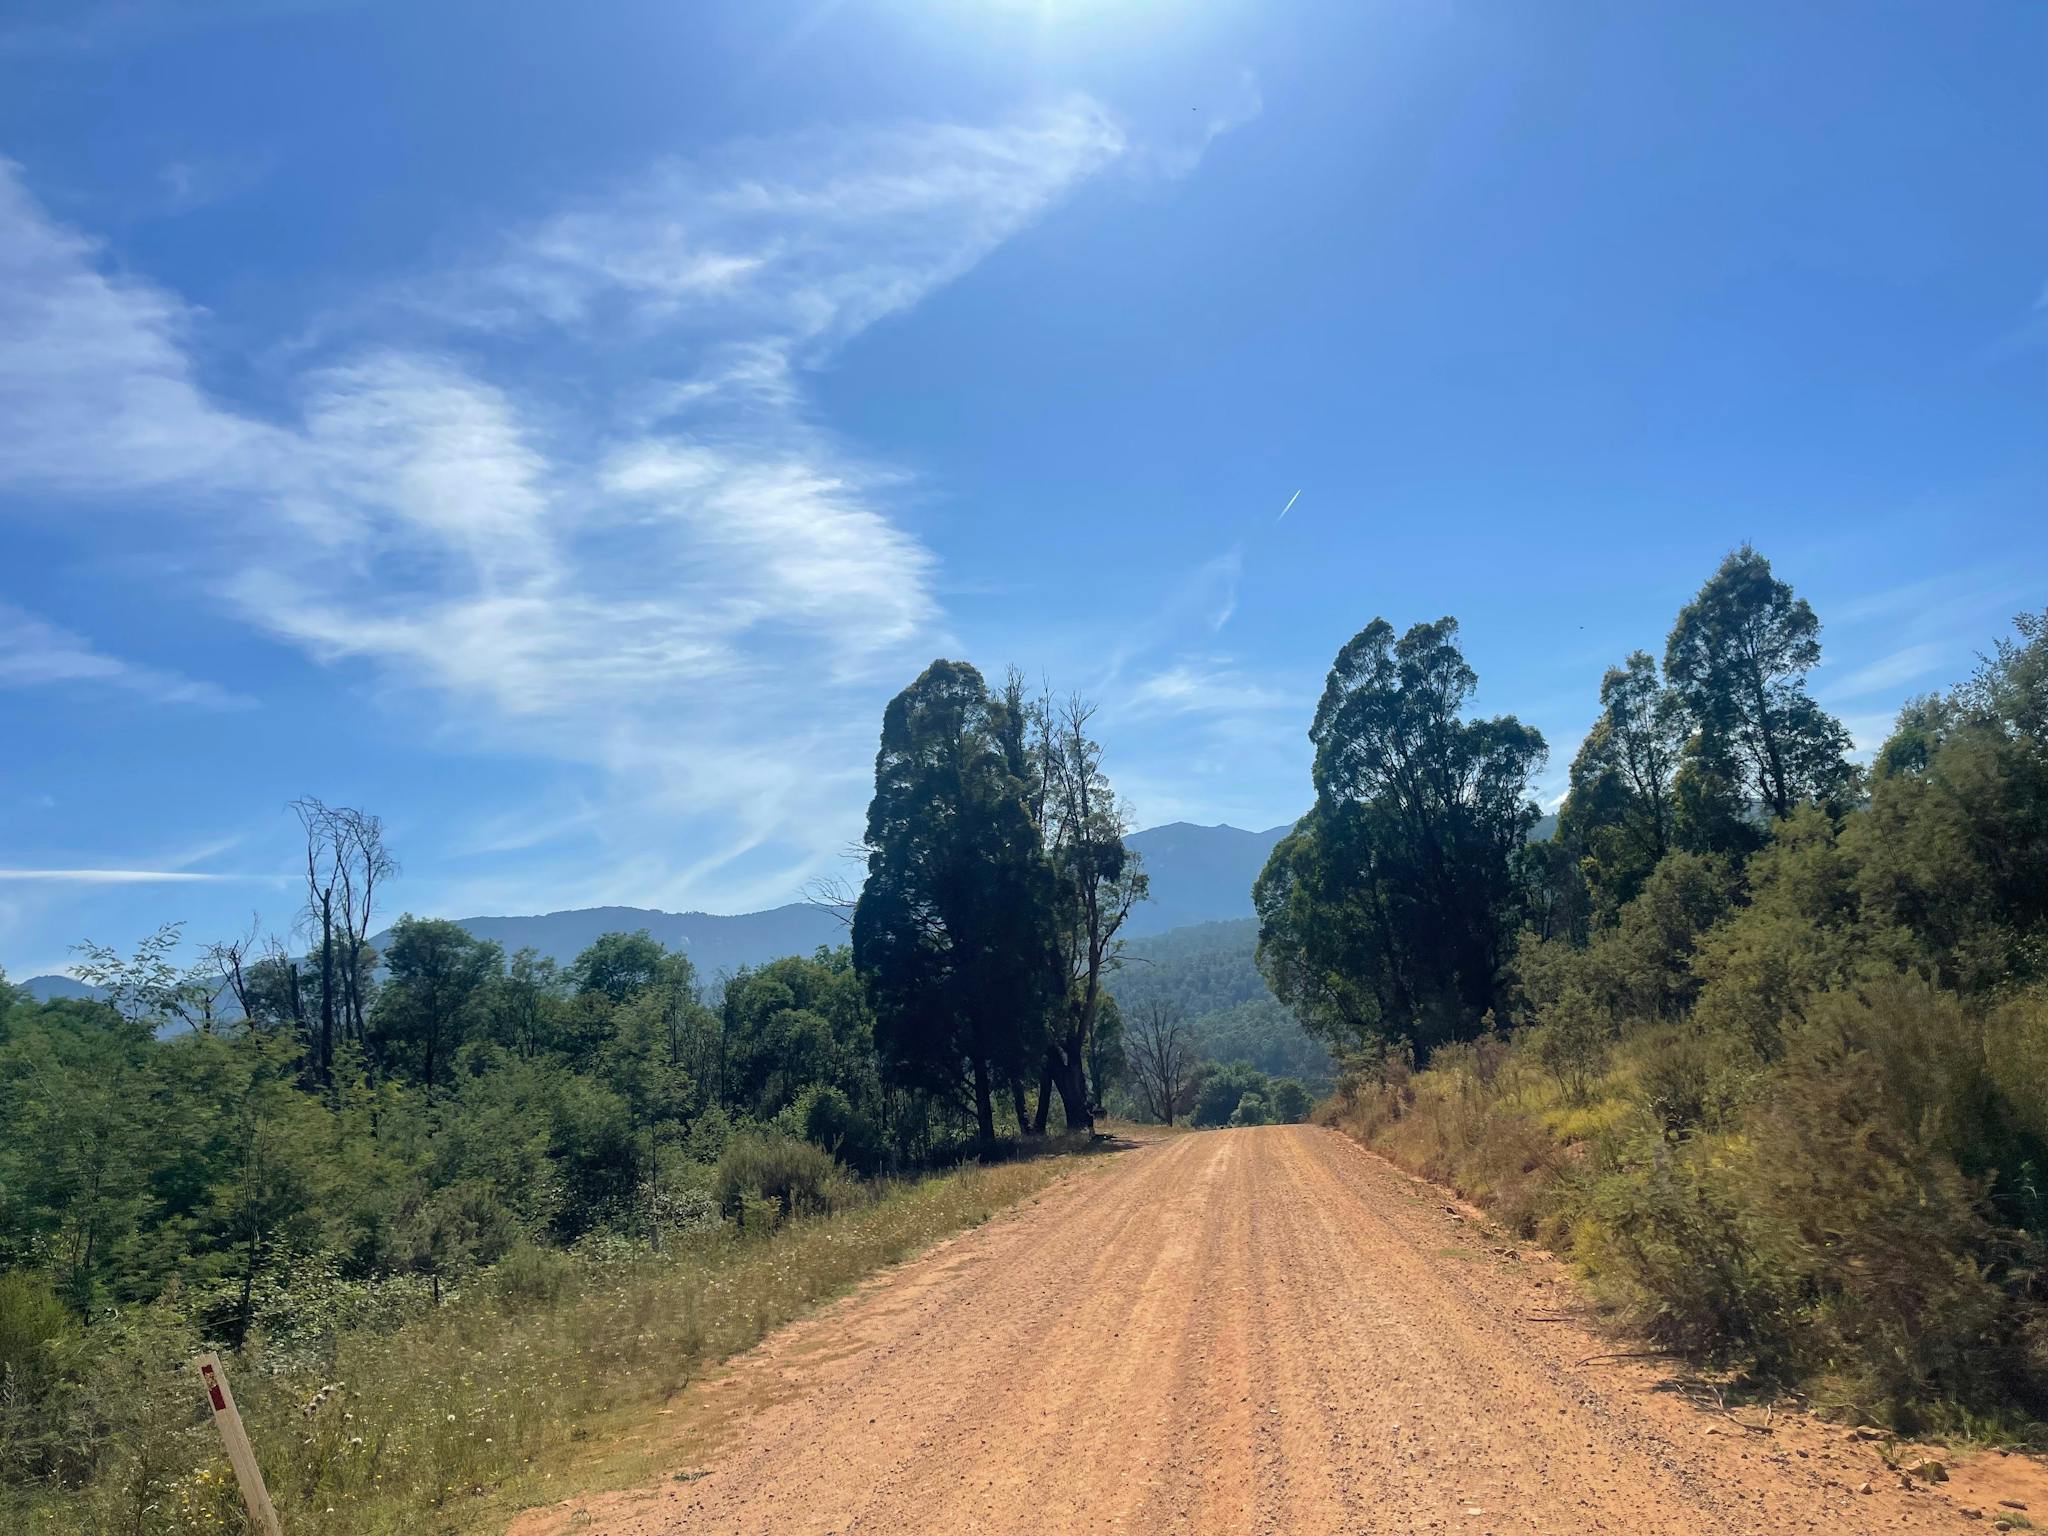 Rusty in coloured gravel road, bushes on both sides, trees, mountains, blue sky with wispy clouds